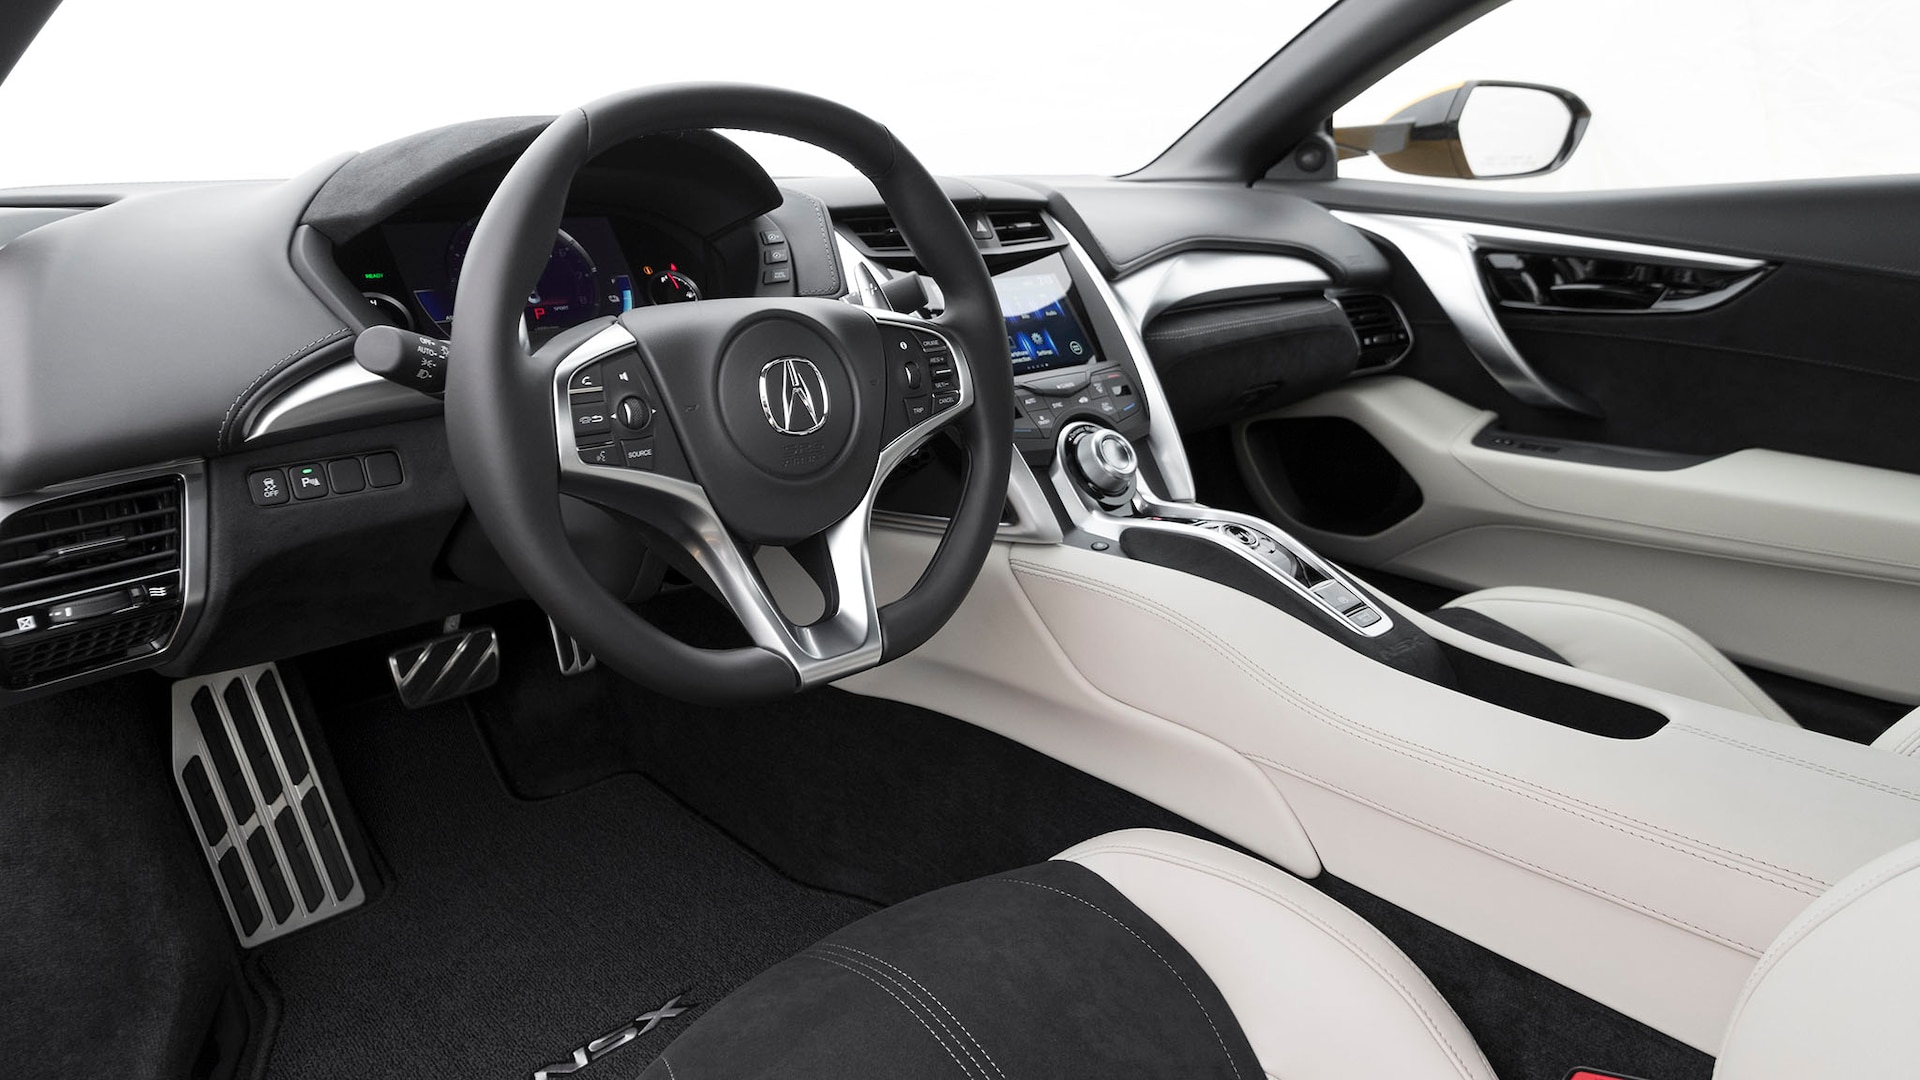 2020 Acura NSX Interior Review: This Is a Supercar?